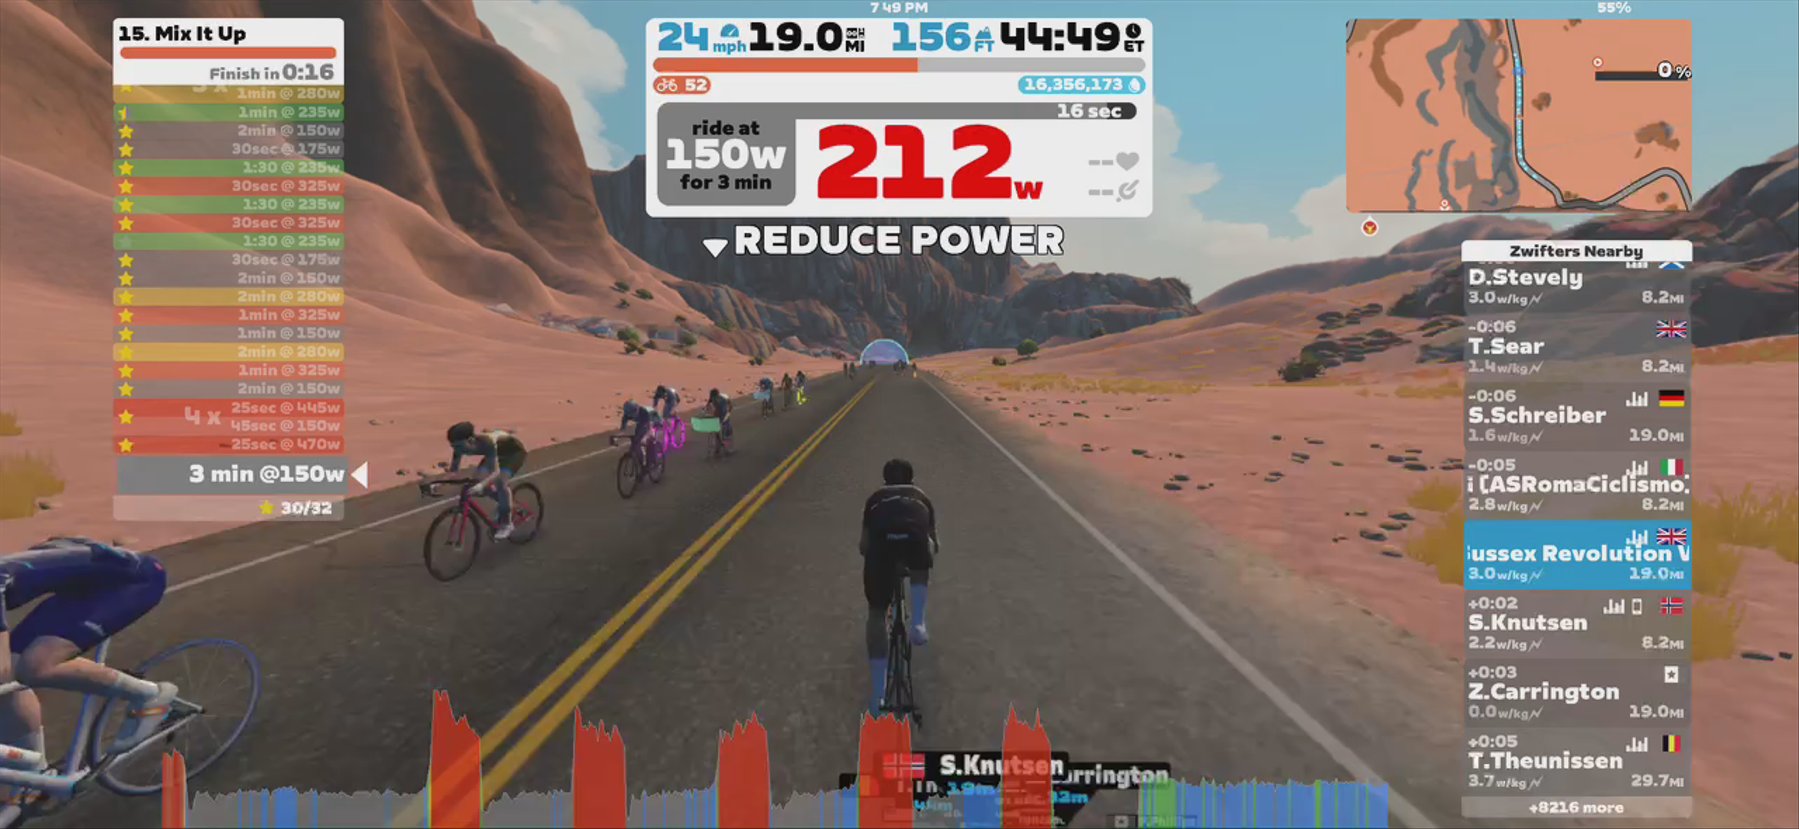 Zwift - 15. Mix It Up in Watopia